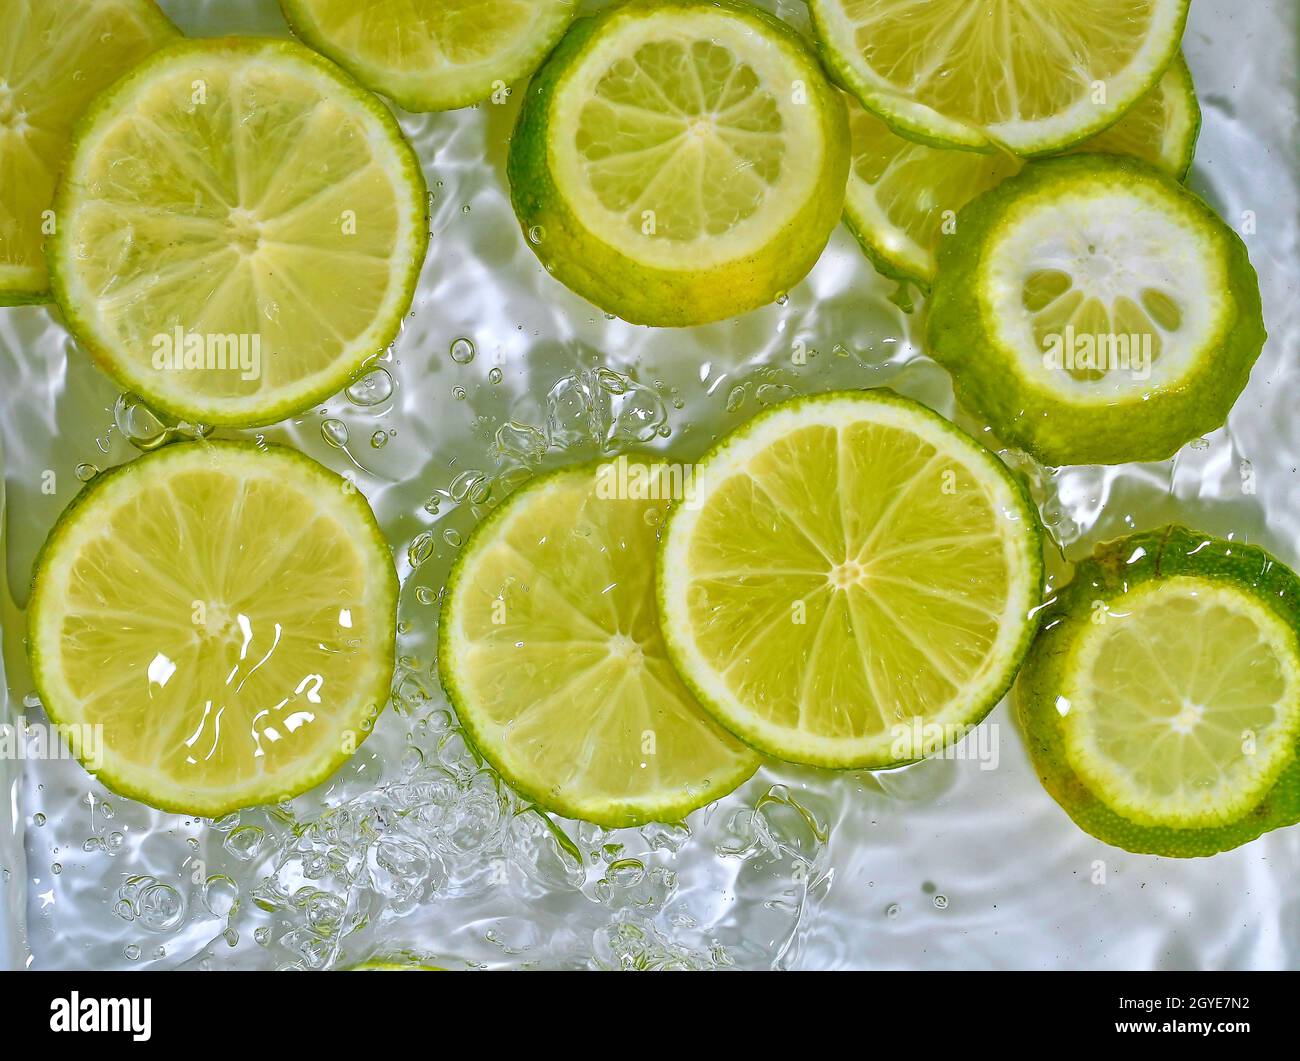 Close-up fresh slices of green limes on white background. Slices of limes in sparkling water on white background, closeup. Citrus soda. Copy space. Stock Photo